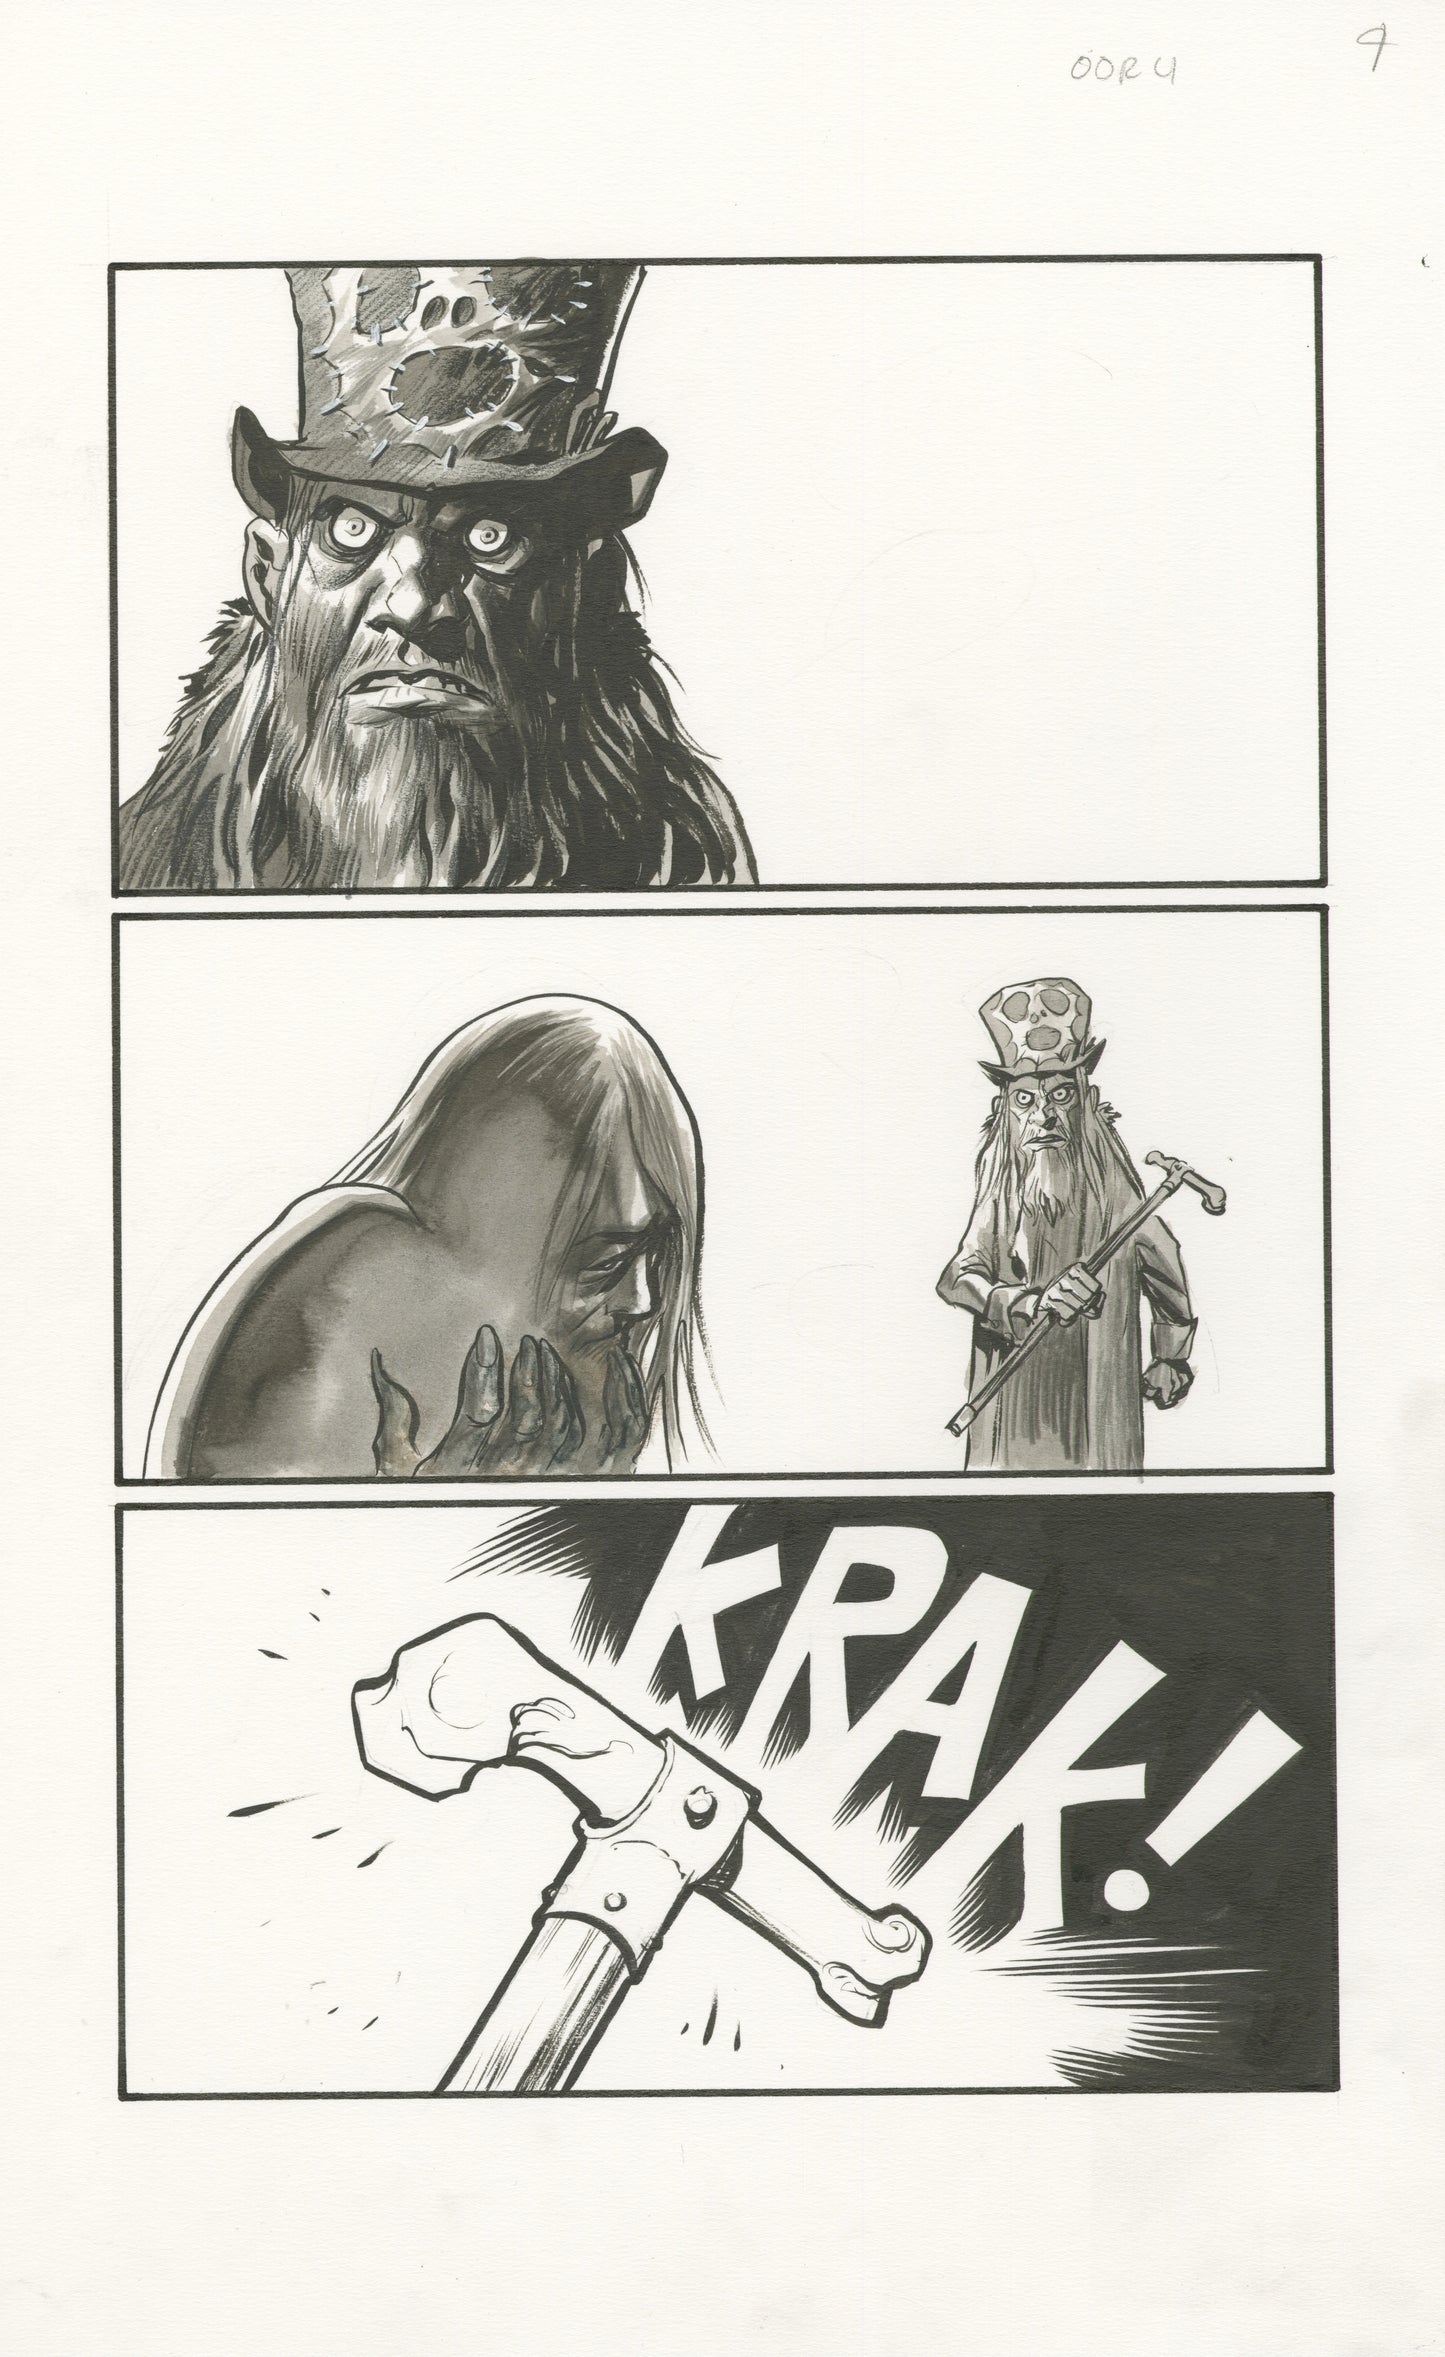 The Goon: Occasion of Revenge #04, page #09